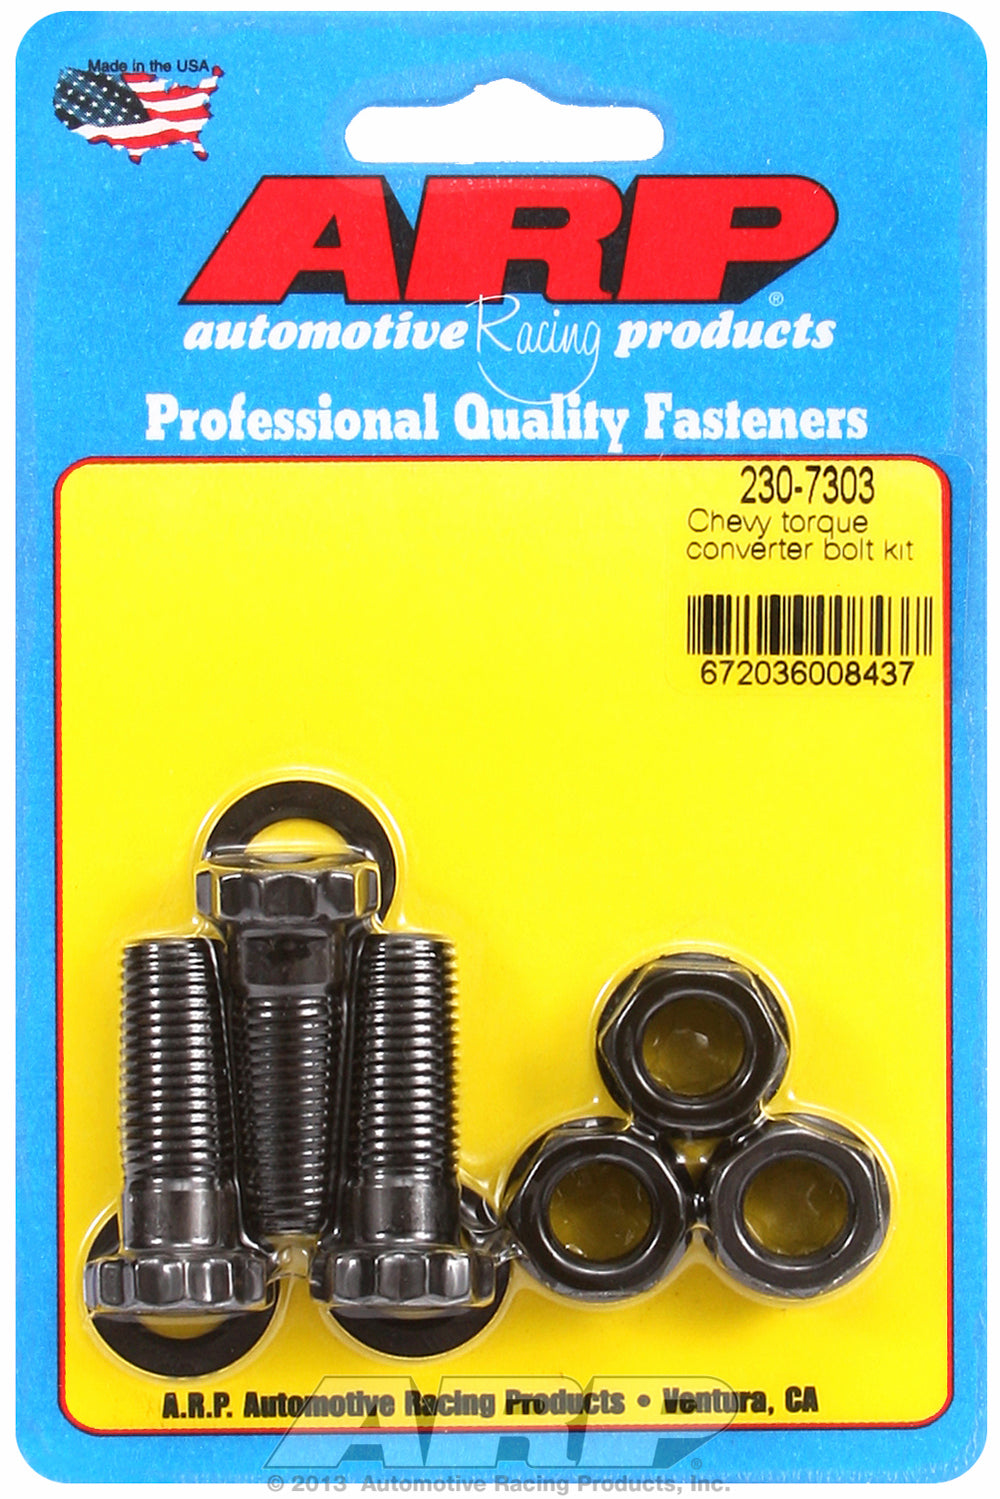 Pro Series Torque Converter Bolts for GM Powerglide, TH350 & TH400 w/ race converter - 1/2˝ thick ta